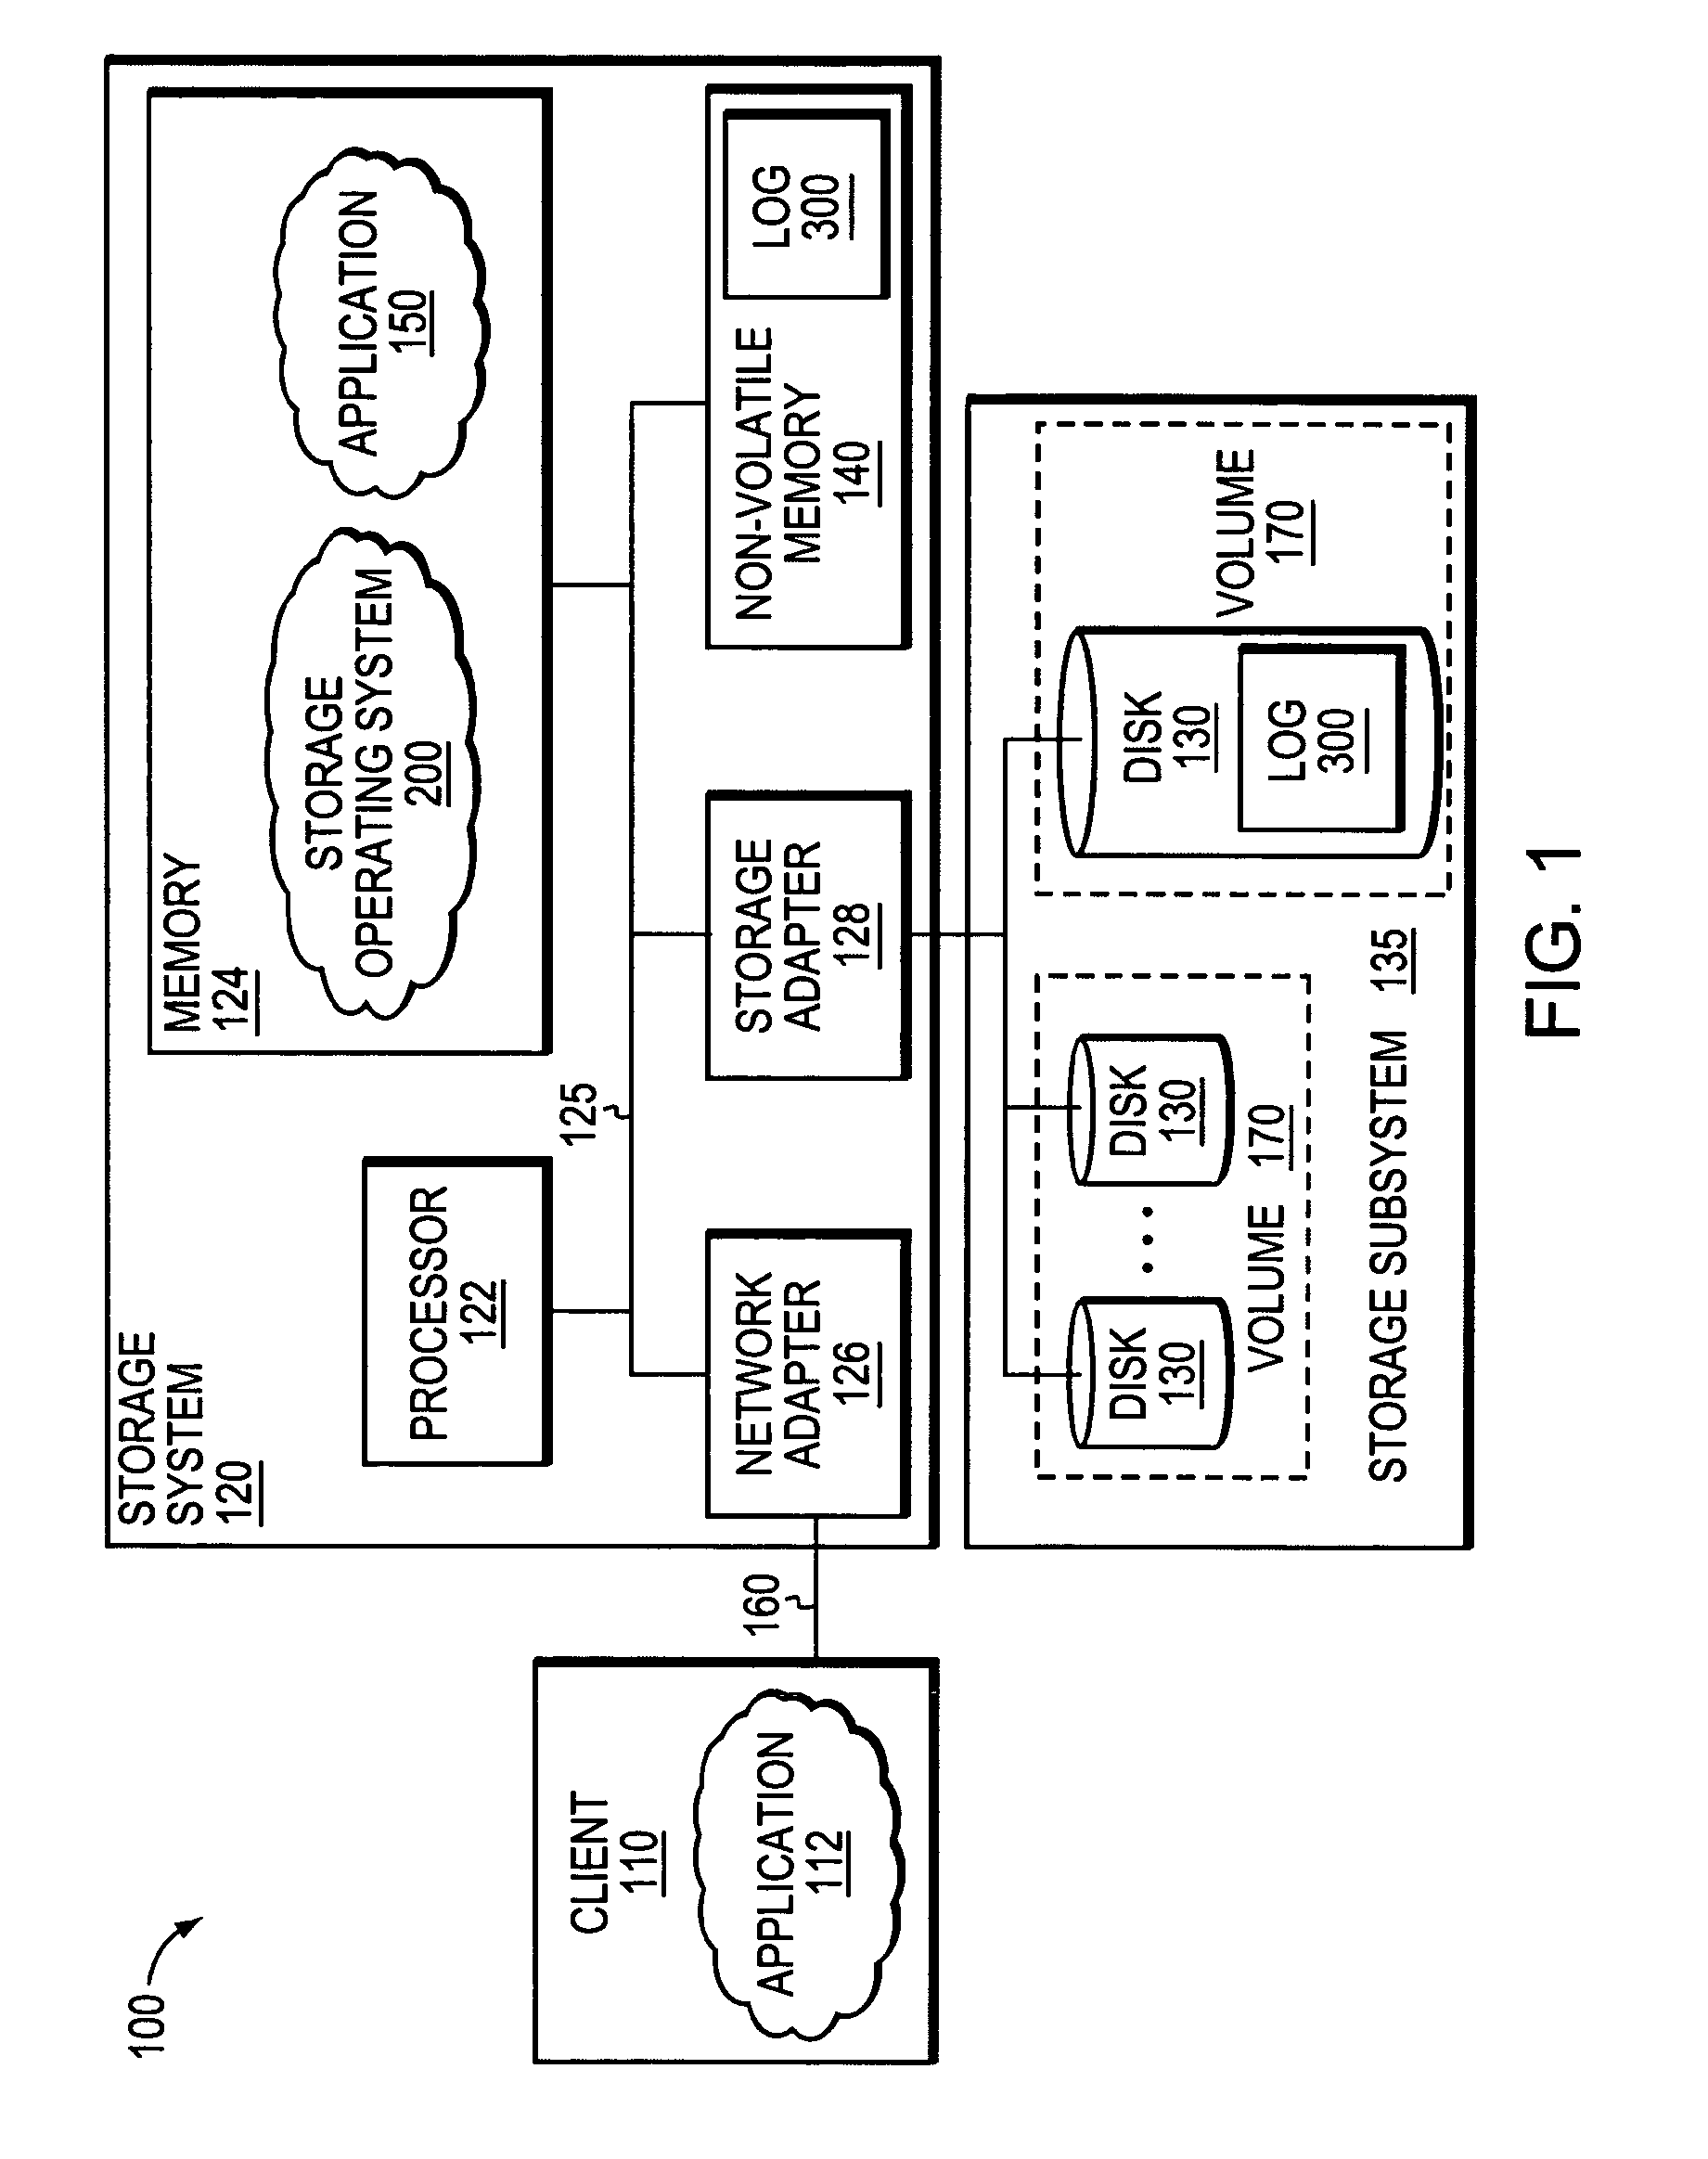 System and method for enhancing log performance